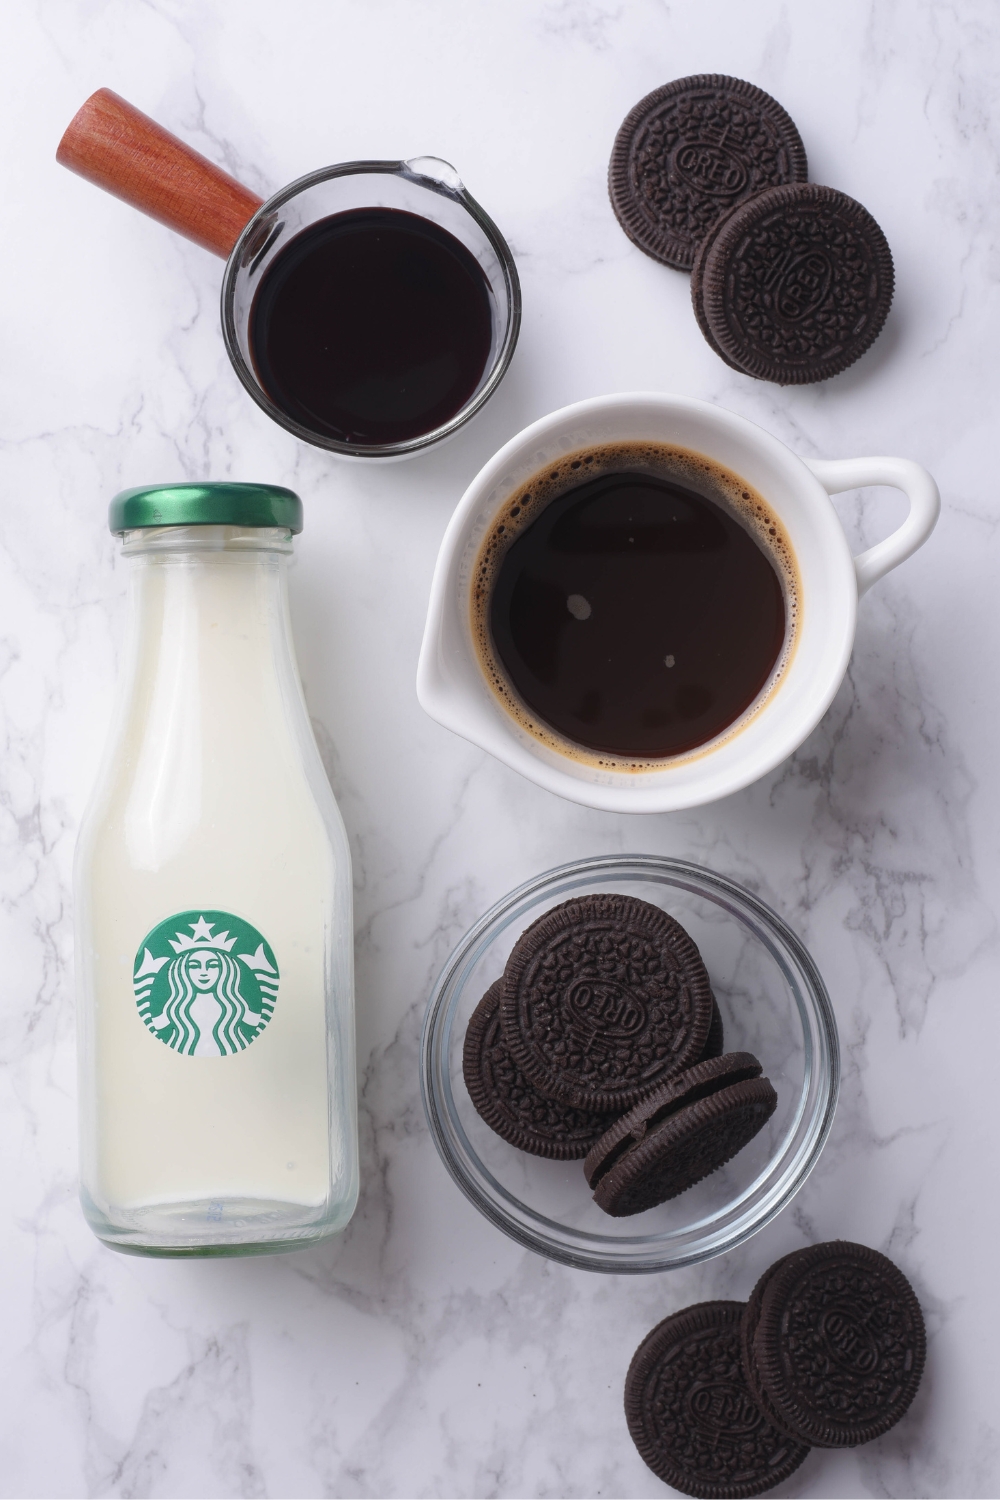 A countertop with a milk jug, Oreos, and coffee in separate containers.